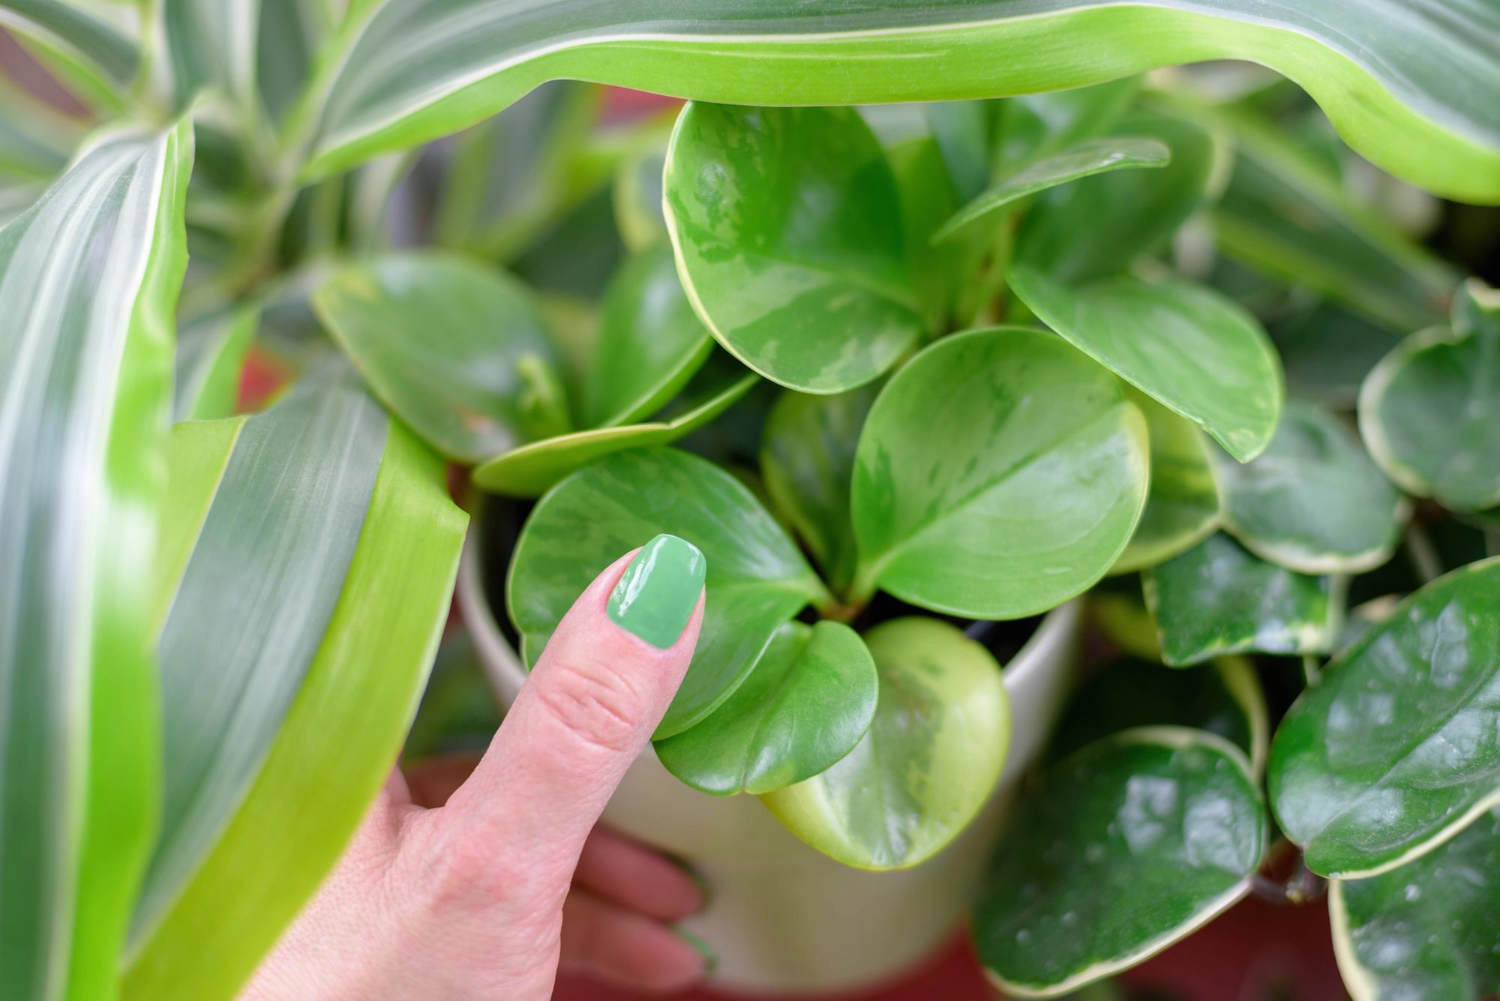 woman-s-hand-with-green-thumb-touching-potted-plant